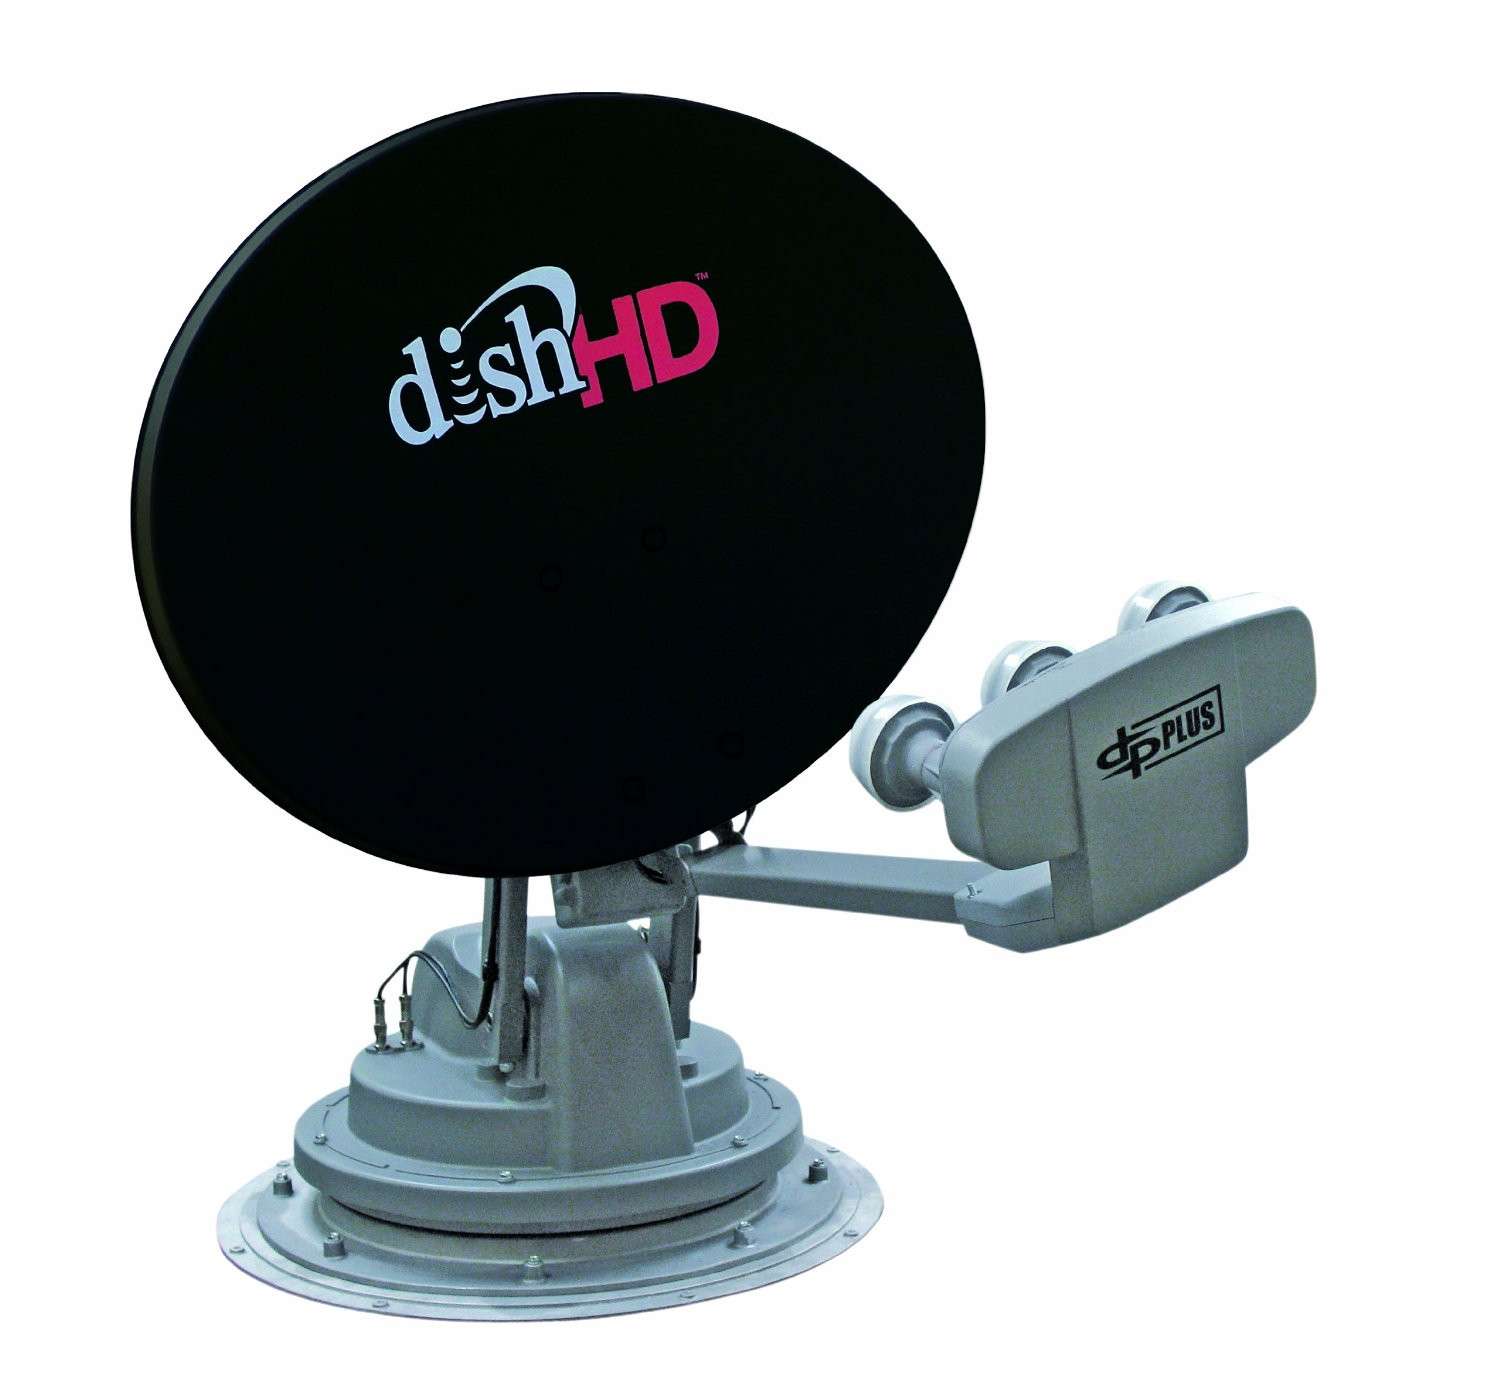 DISH Network Satellite TV for RV, Tailgating, Camping ...